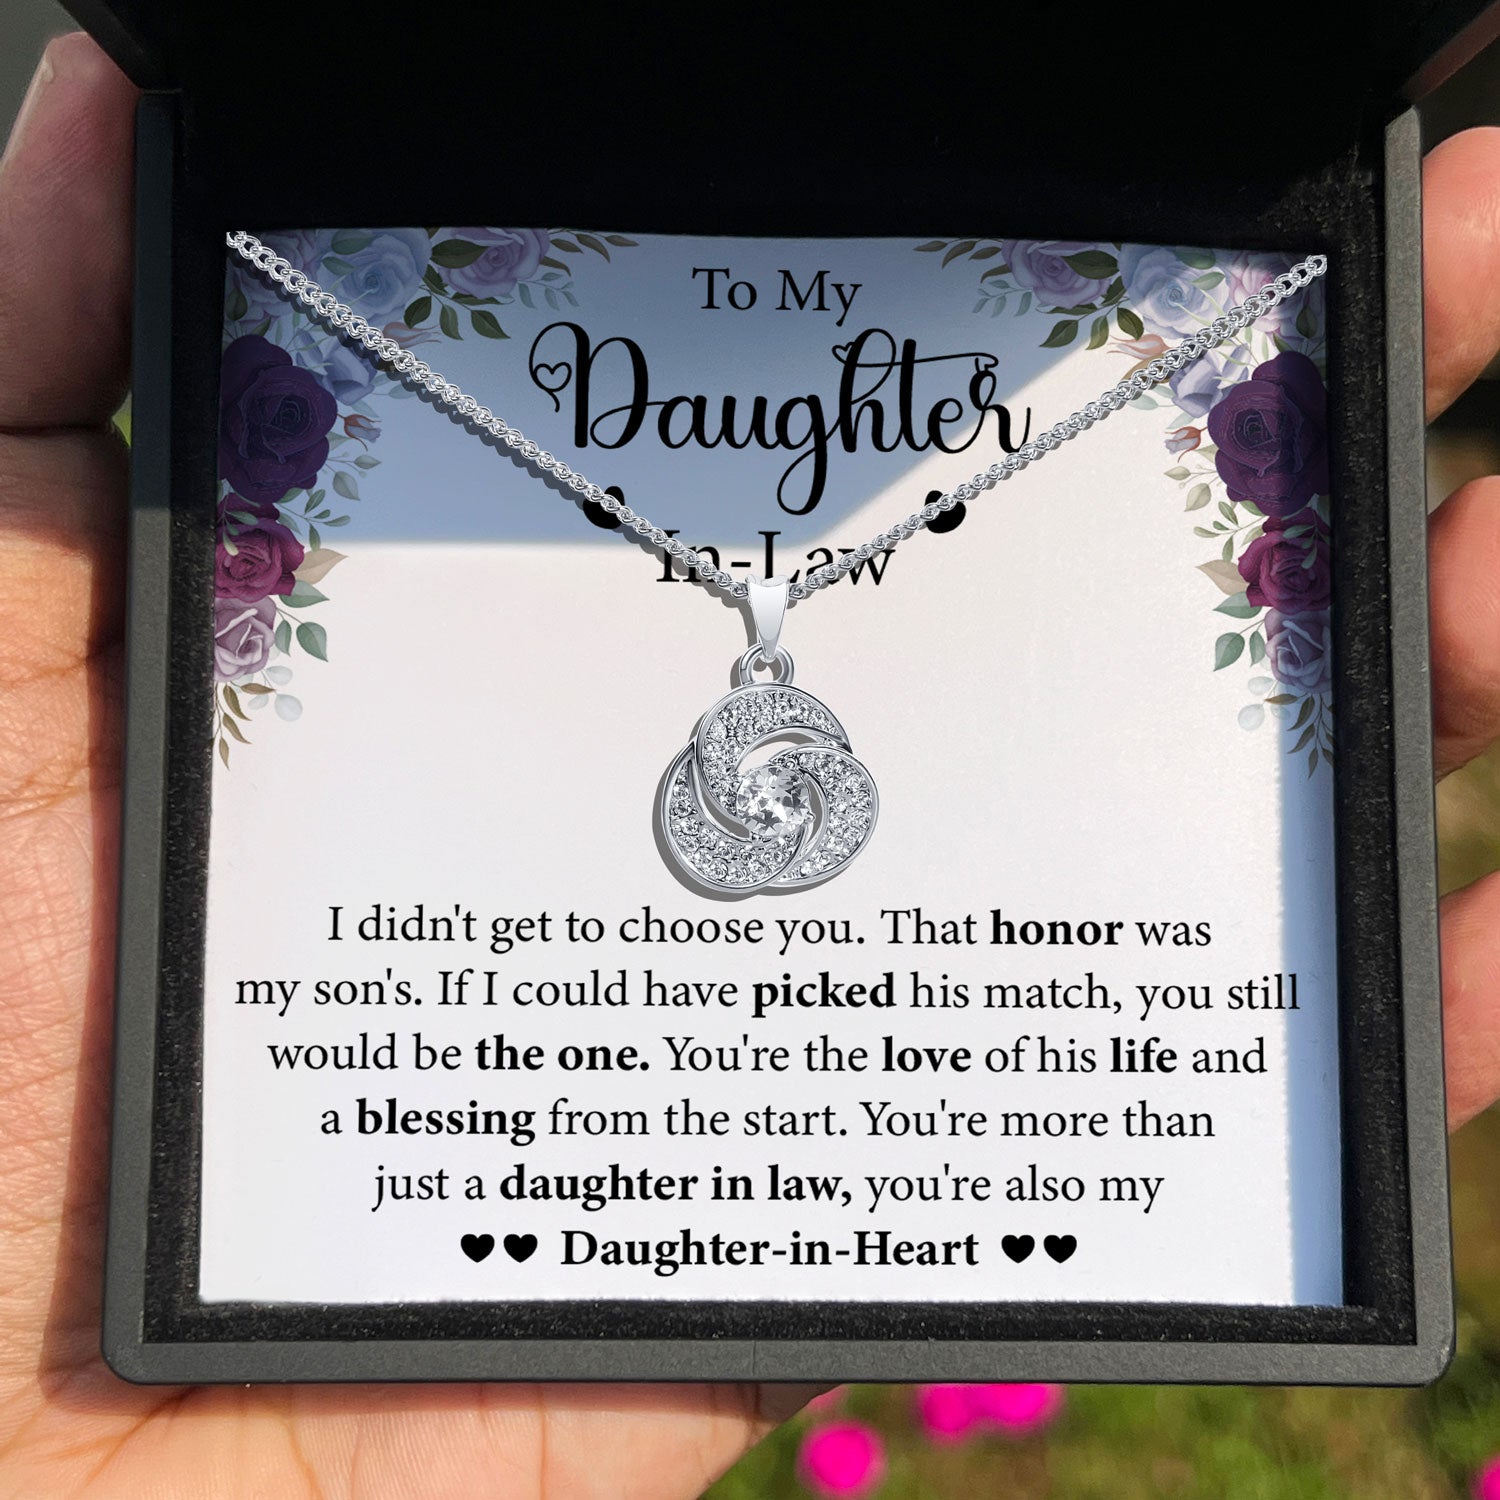 To My Daughter-in-Law - You're More Than Just a Daughter-in-Law - Tryndi Love Knot Necklace